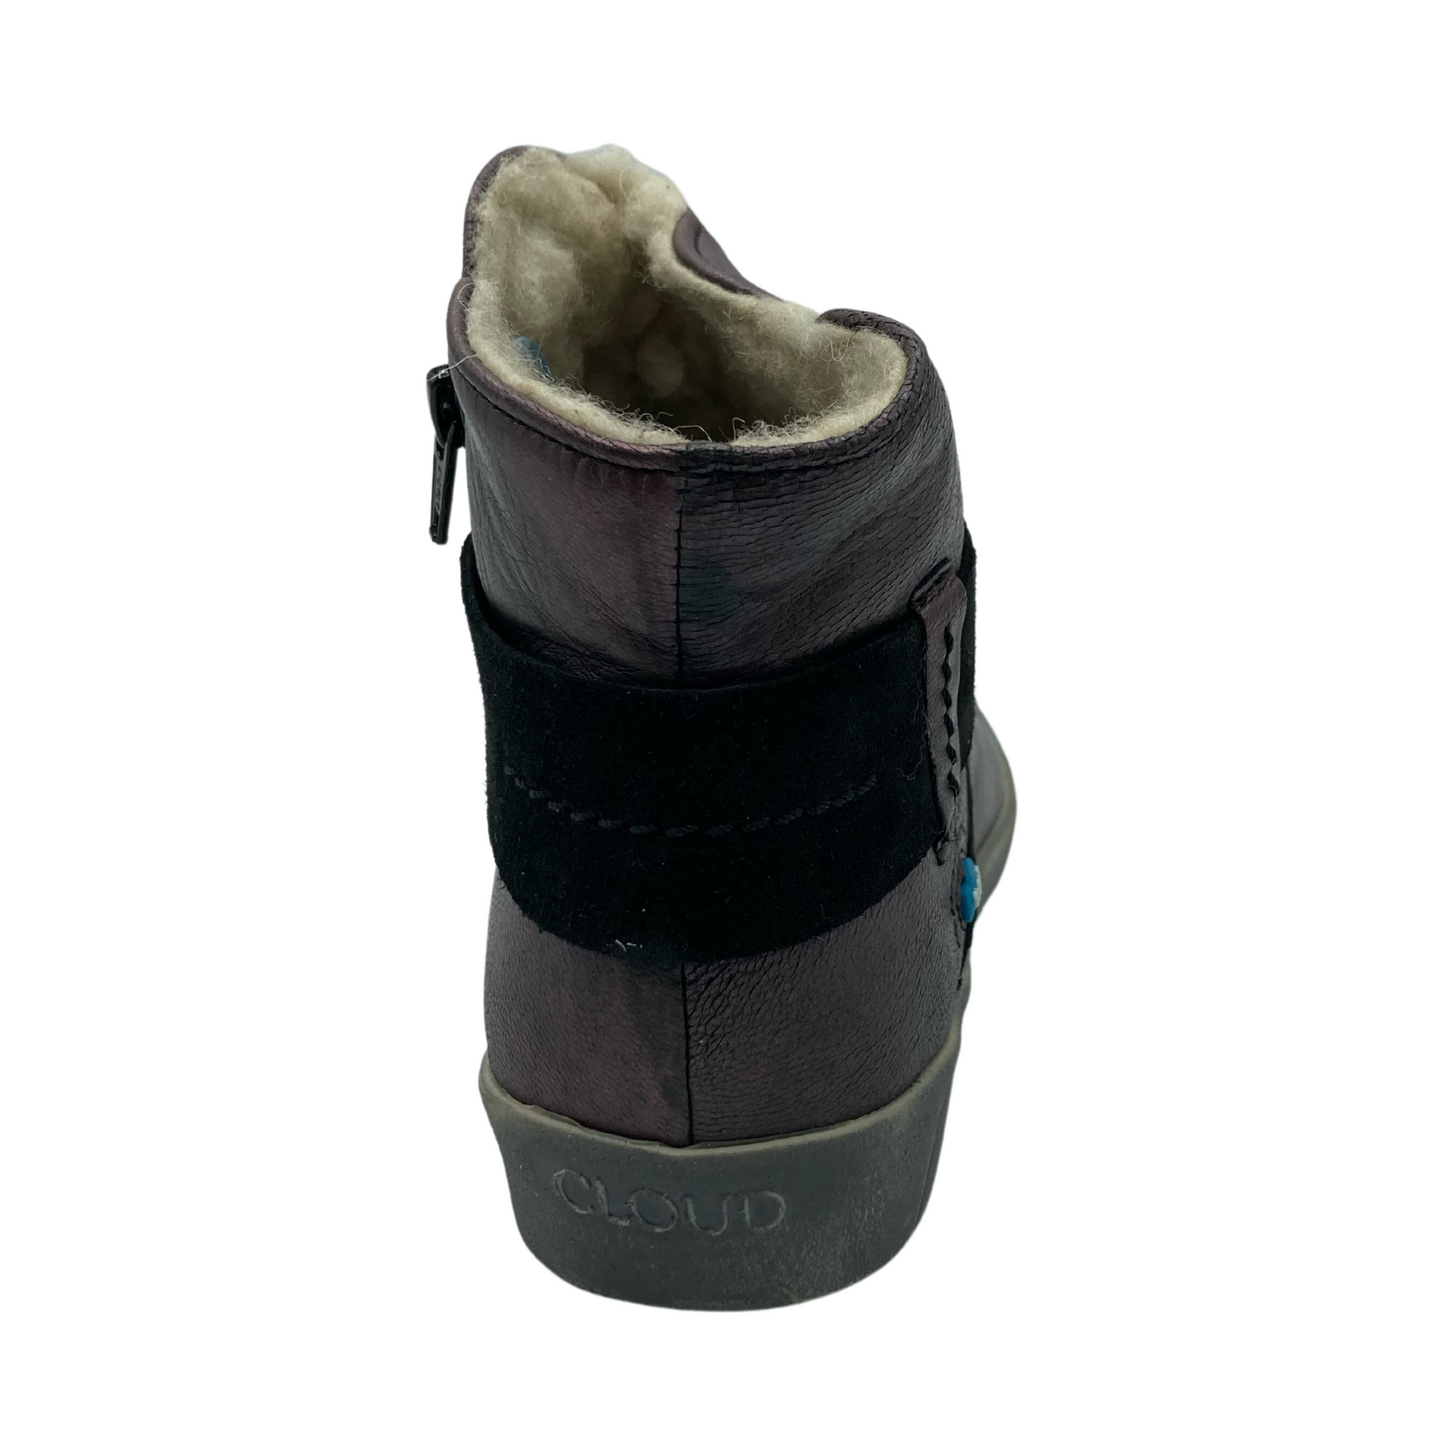 Back view of leather short ankle boot with wrap around strap and grey rubber outsole